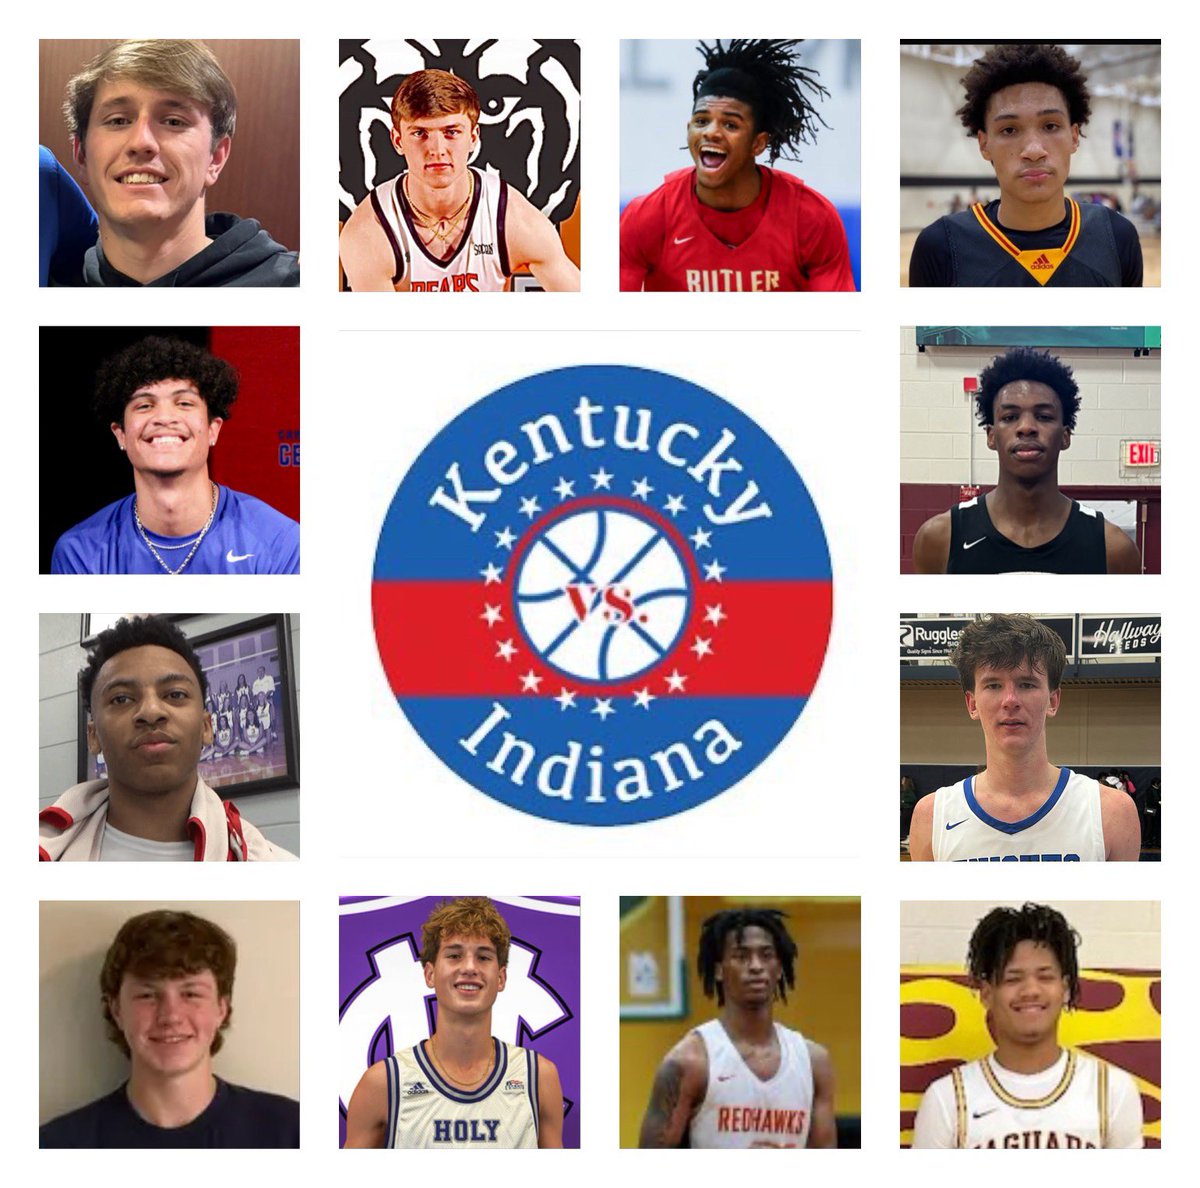 KY Seniors will take on the KY Juniors this Saturday at Eastern HS! Tickets available at the door. #SweepIndiana